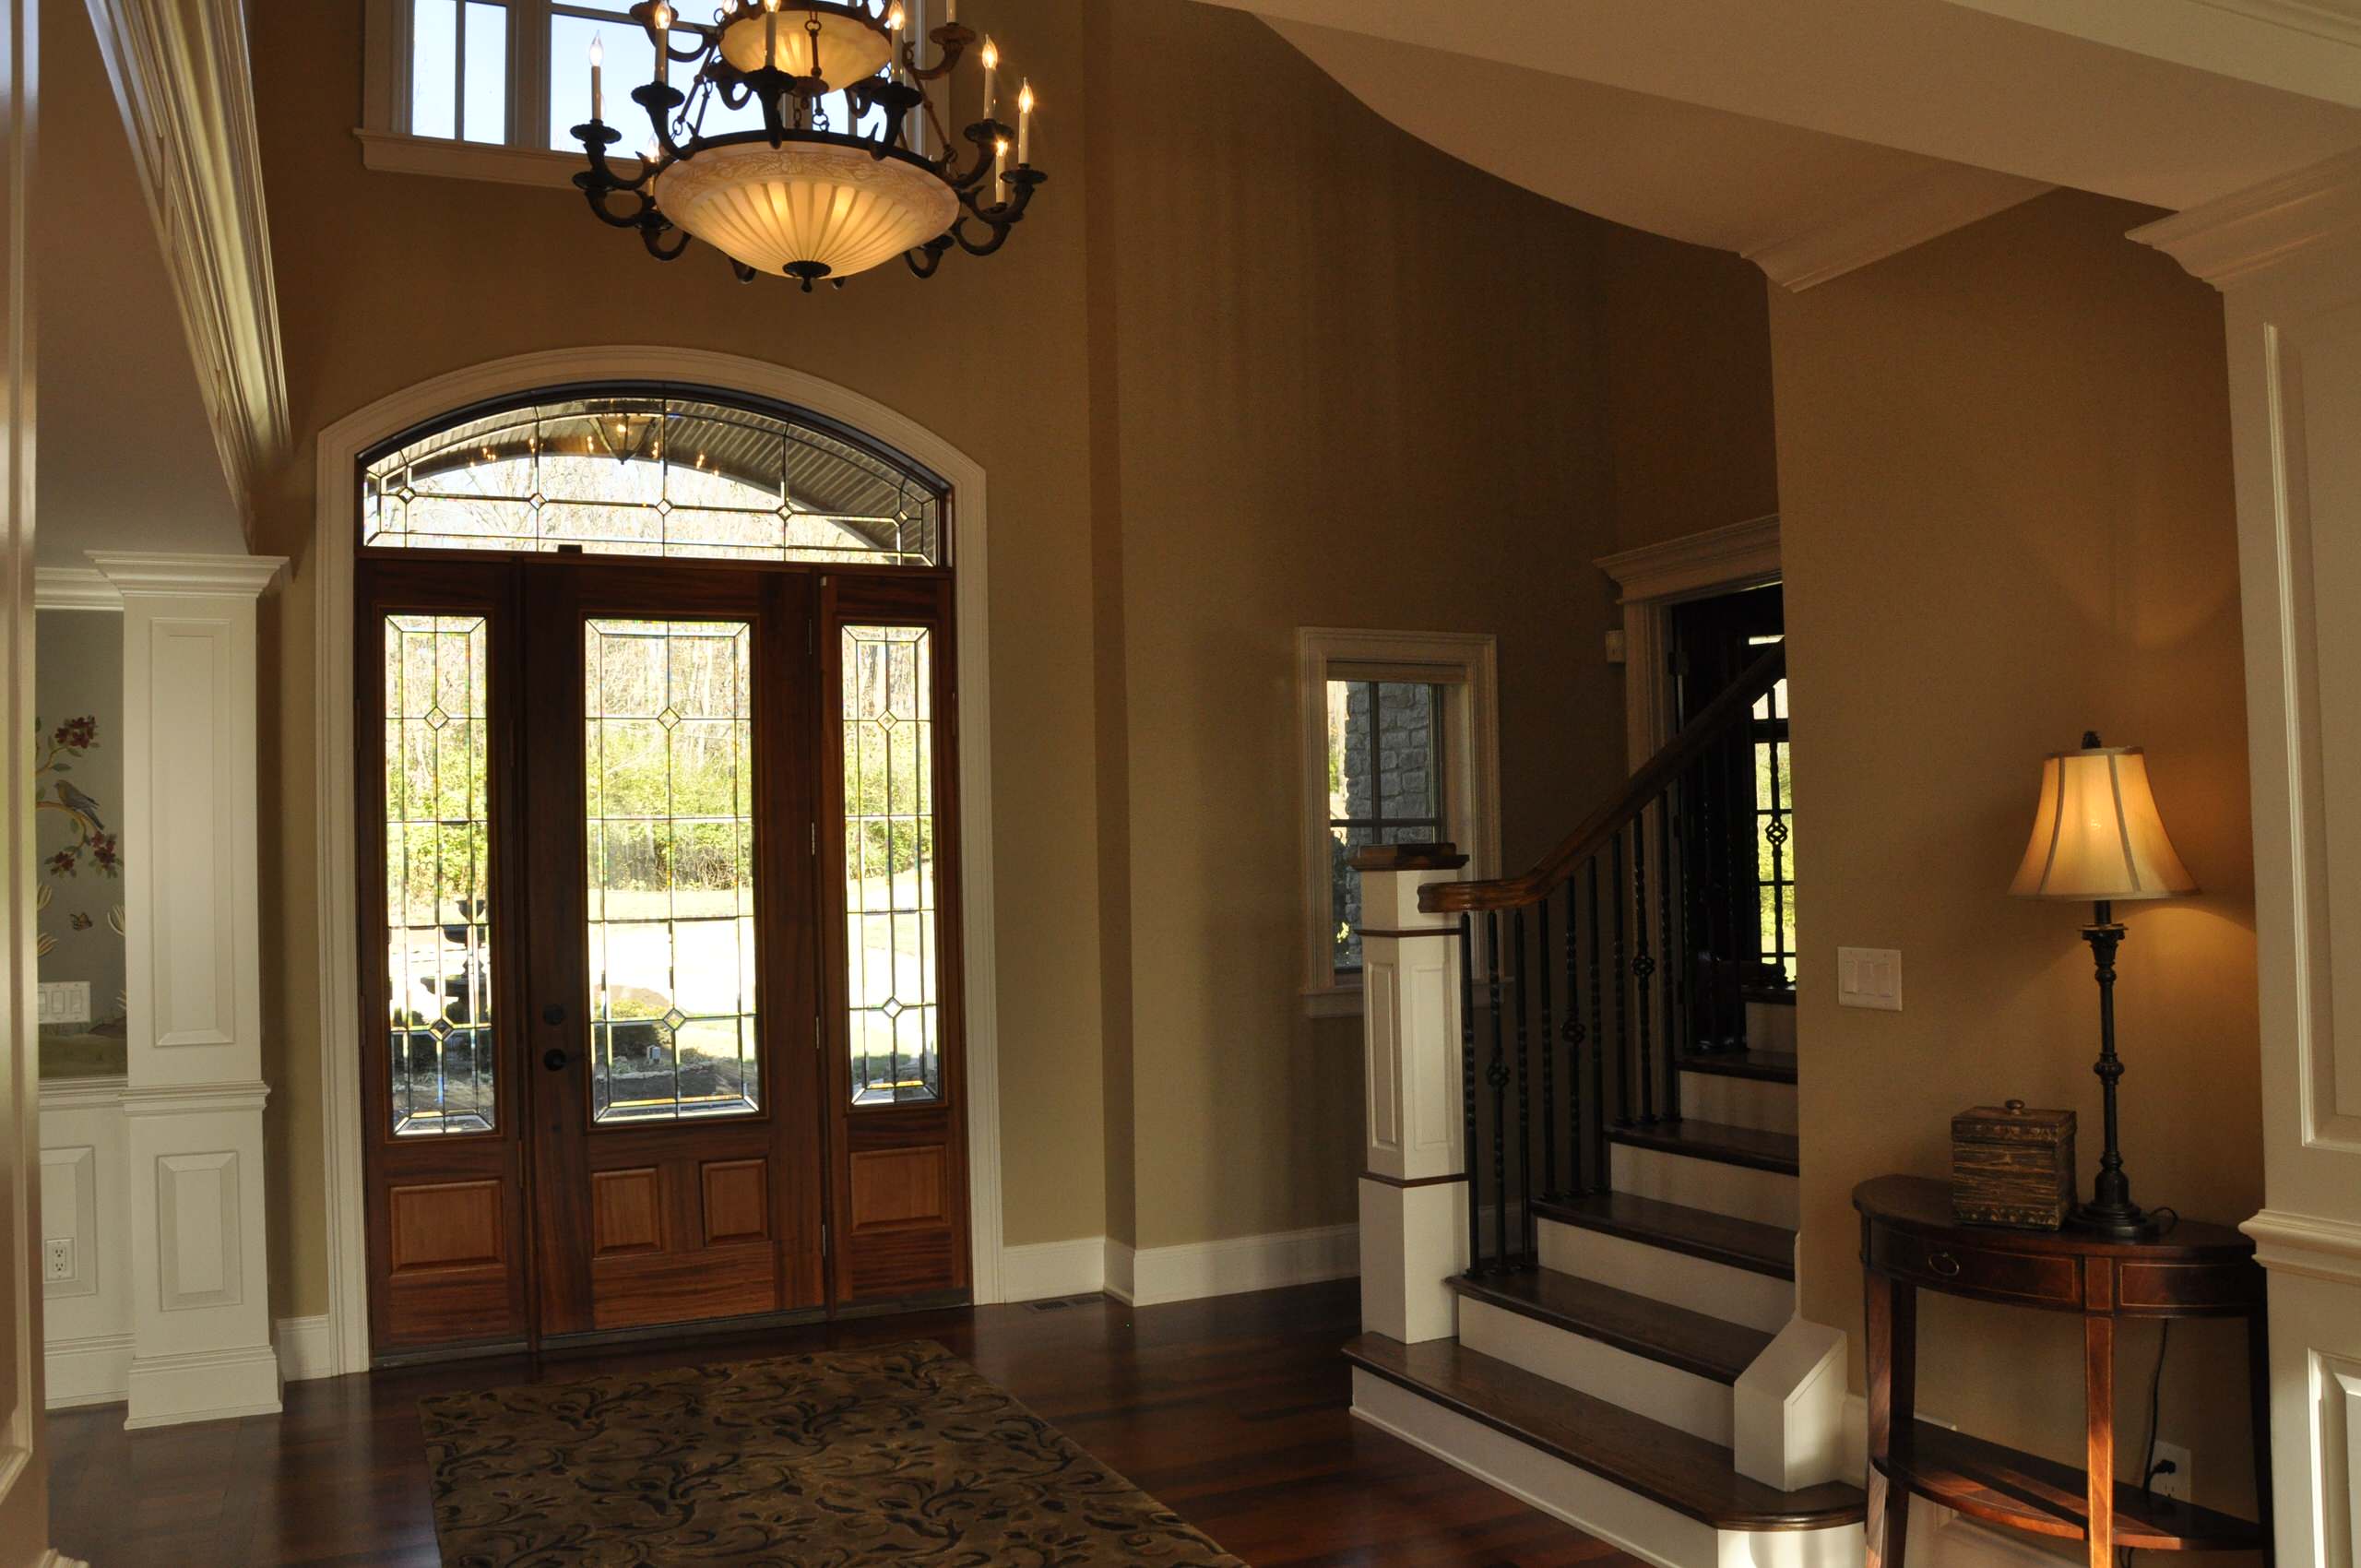 Foyer/ Entry spaces